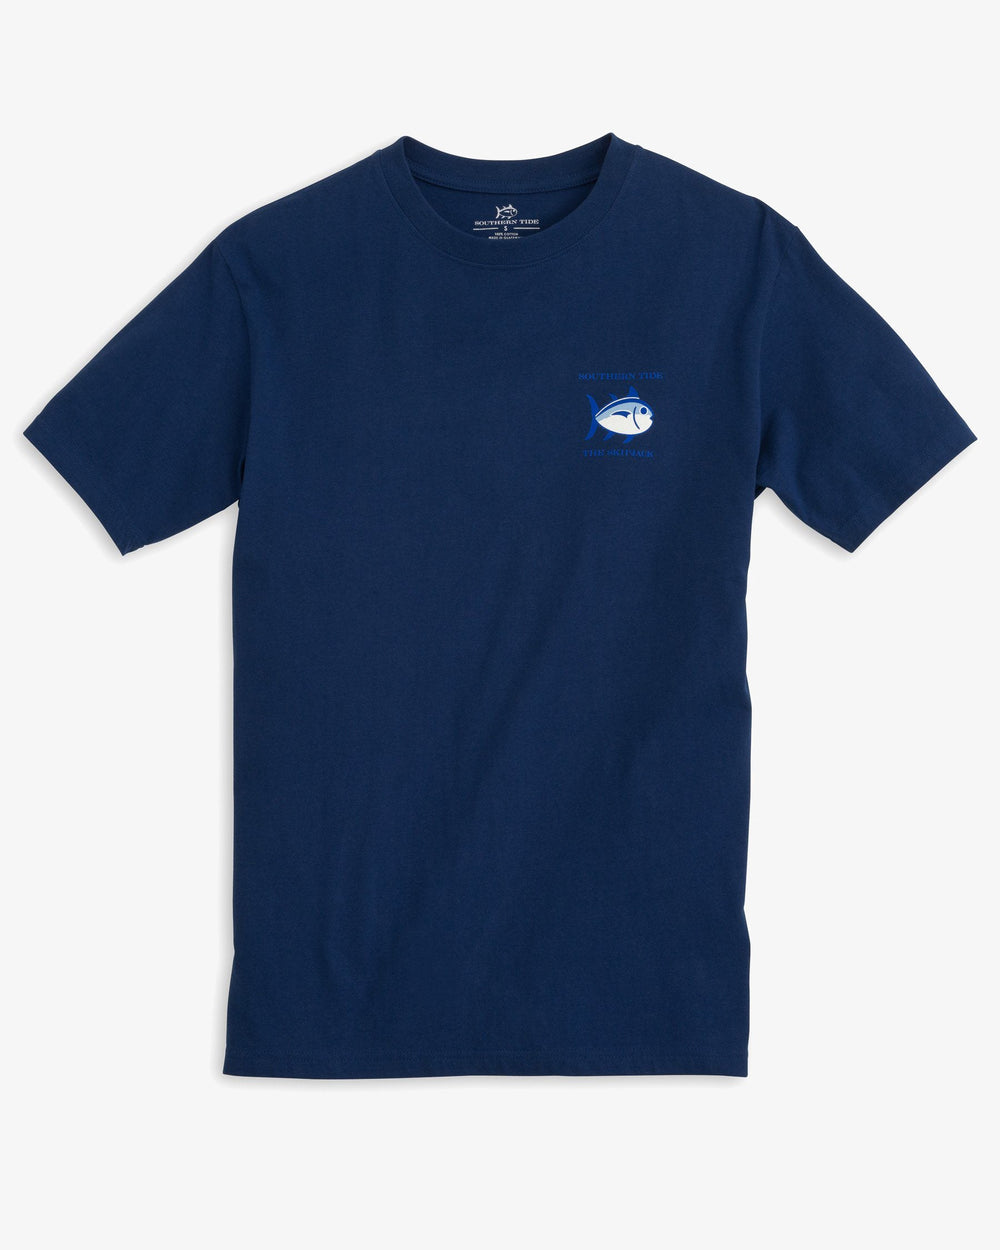 The front view of the Men's Navy Original Skipjack Short Sleeve T-Shirt by Southern Tide - Yacht Blue